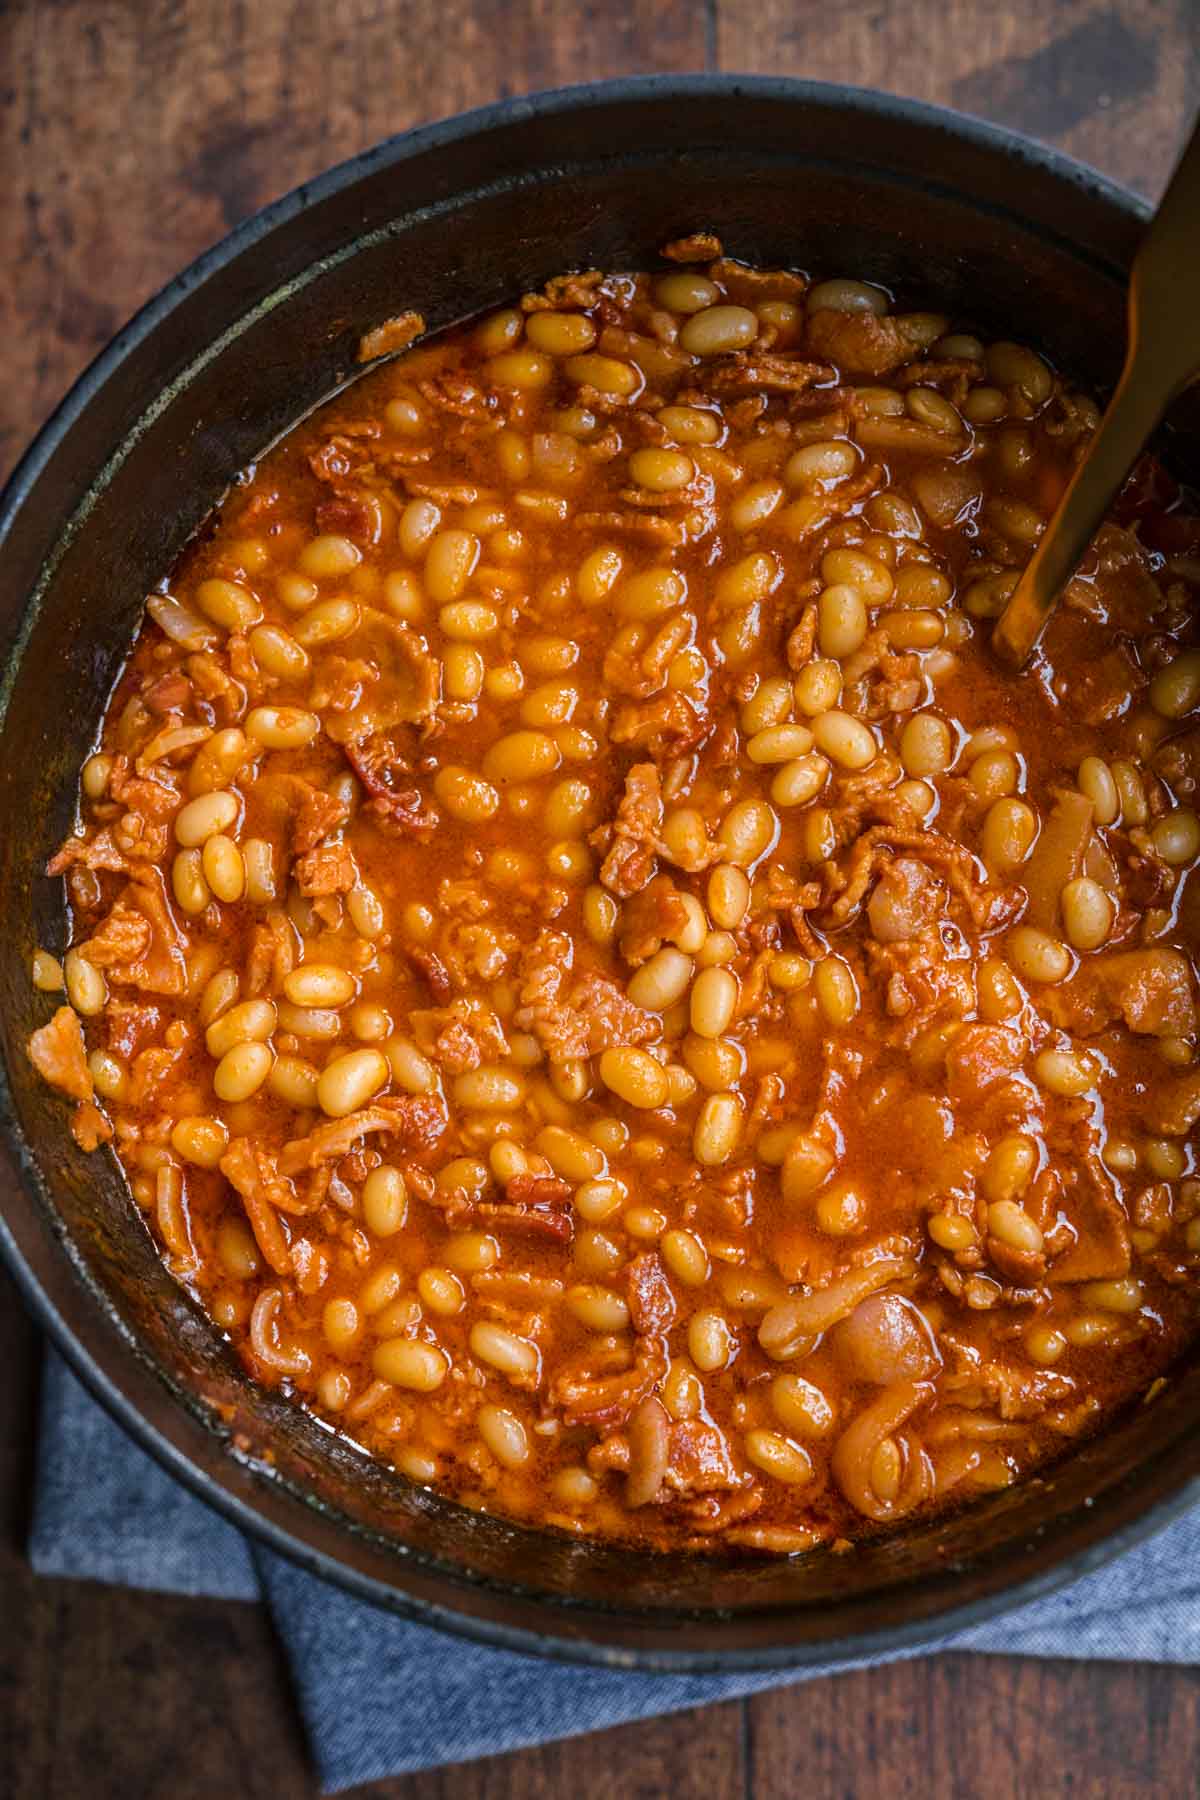 Homemade Pork and Beans with bacon and sauce in pot